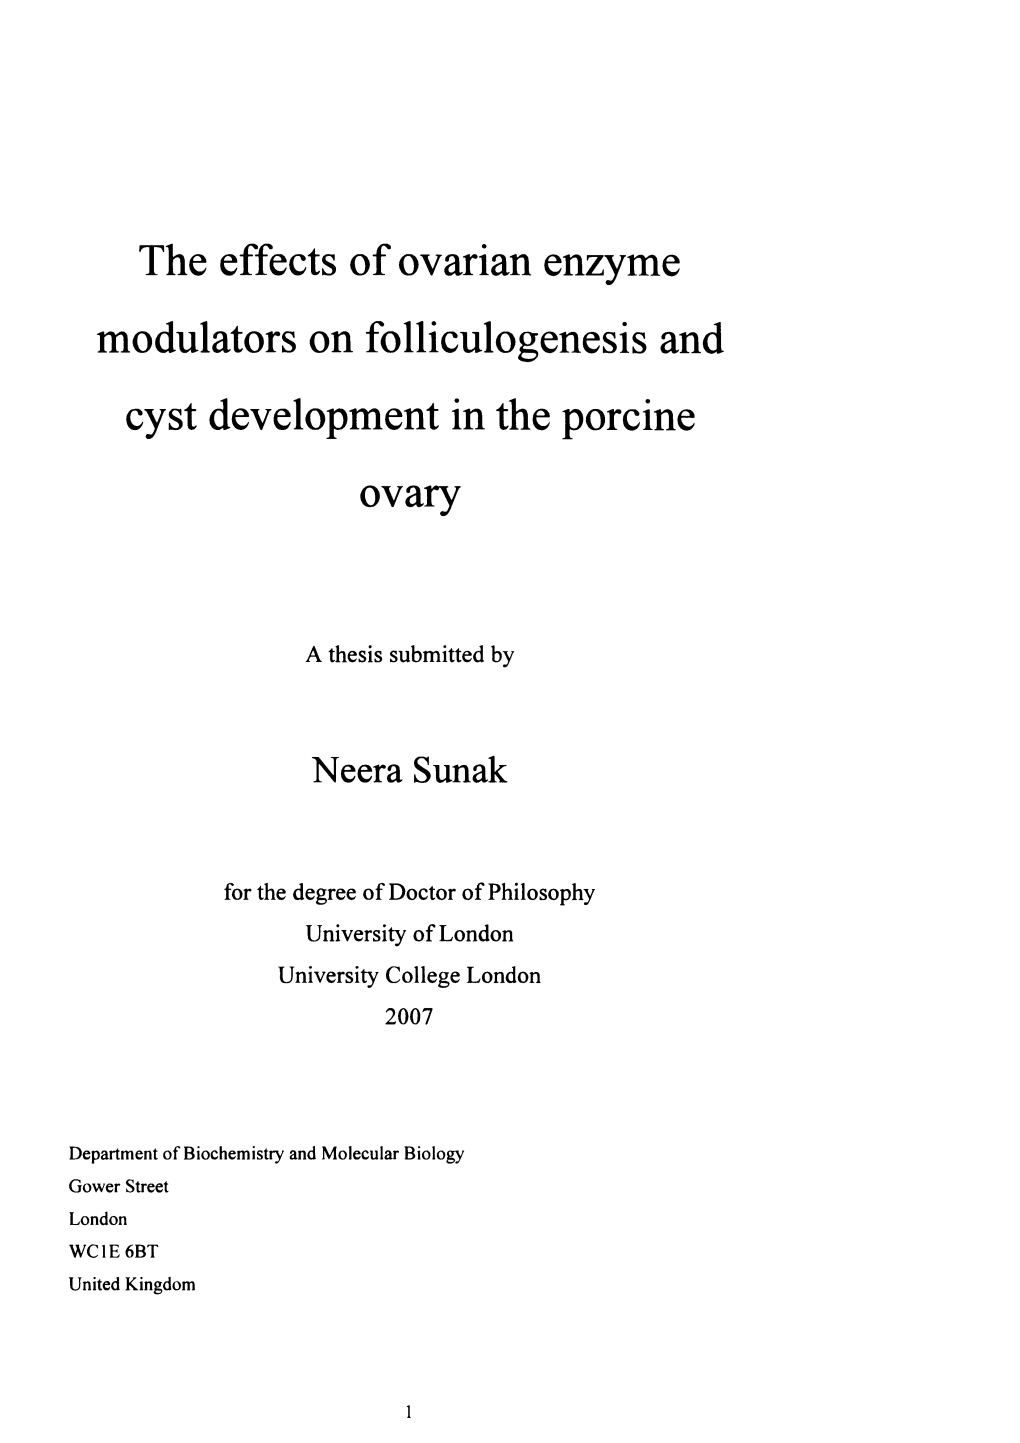 The Effects of Ovarian Enzyme Modulators on Folliculogenesis and Cyst Development in the Porcine Ovary